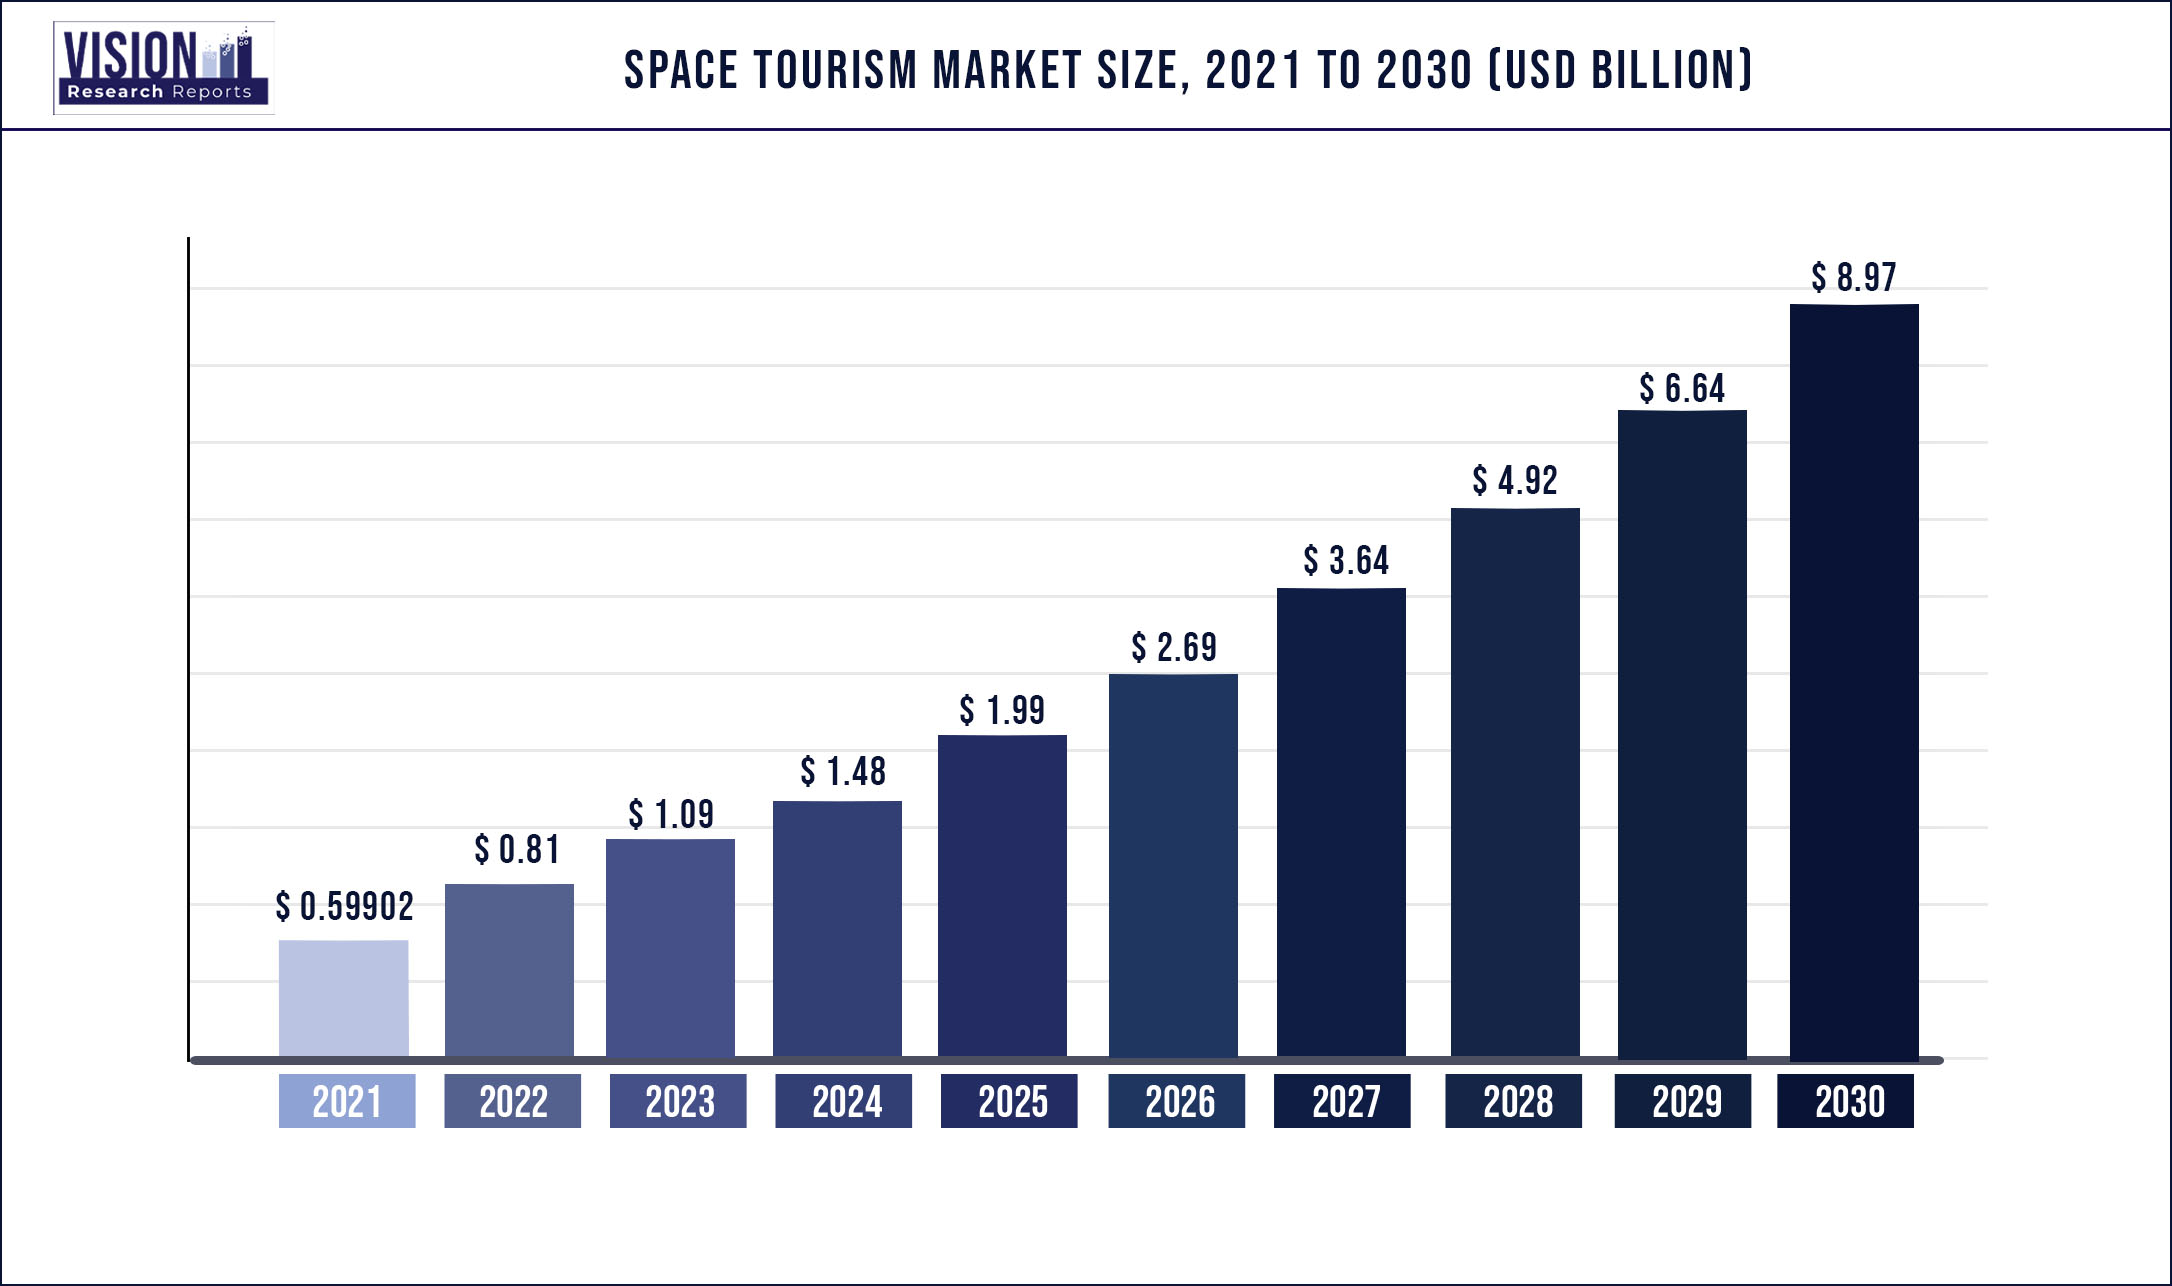 Space Tourism Market Size 2021 to 2030